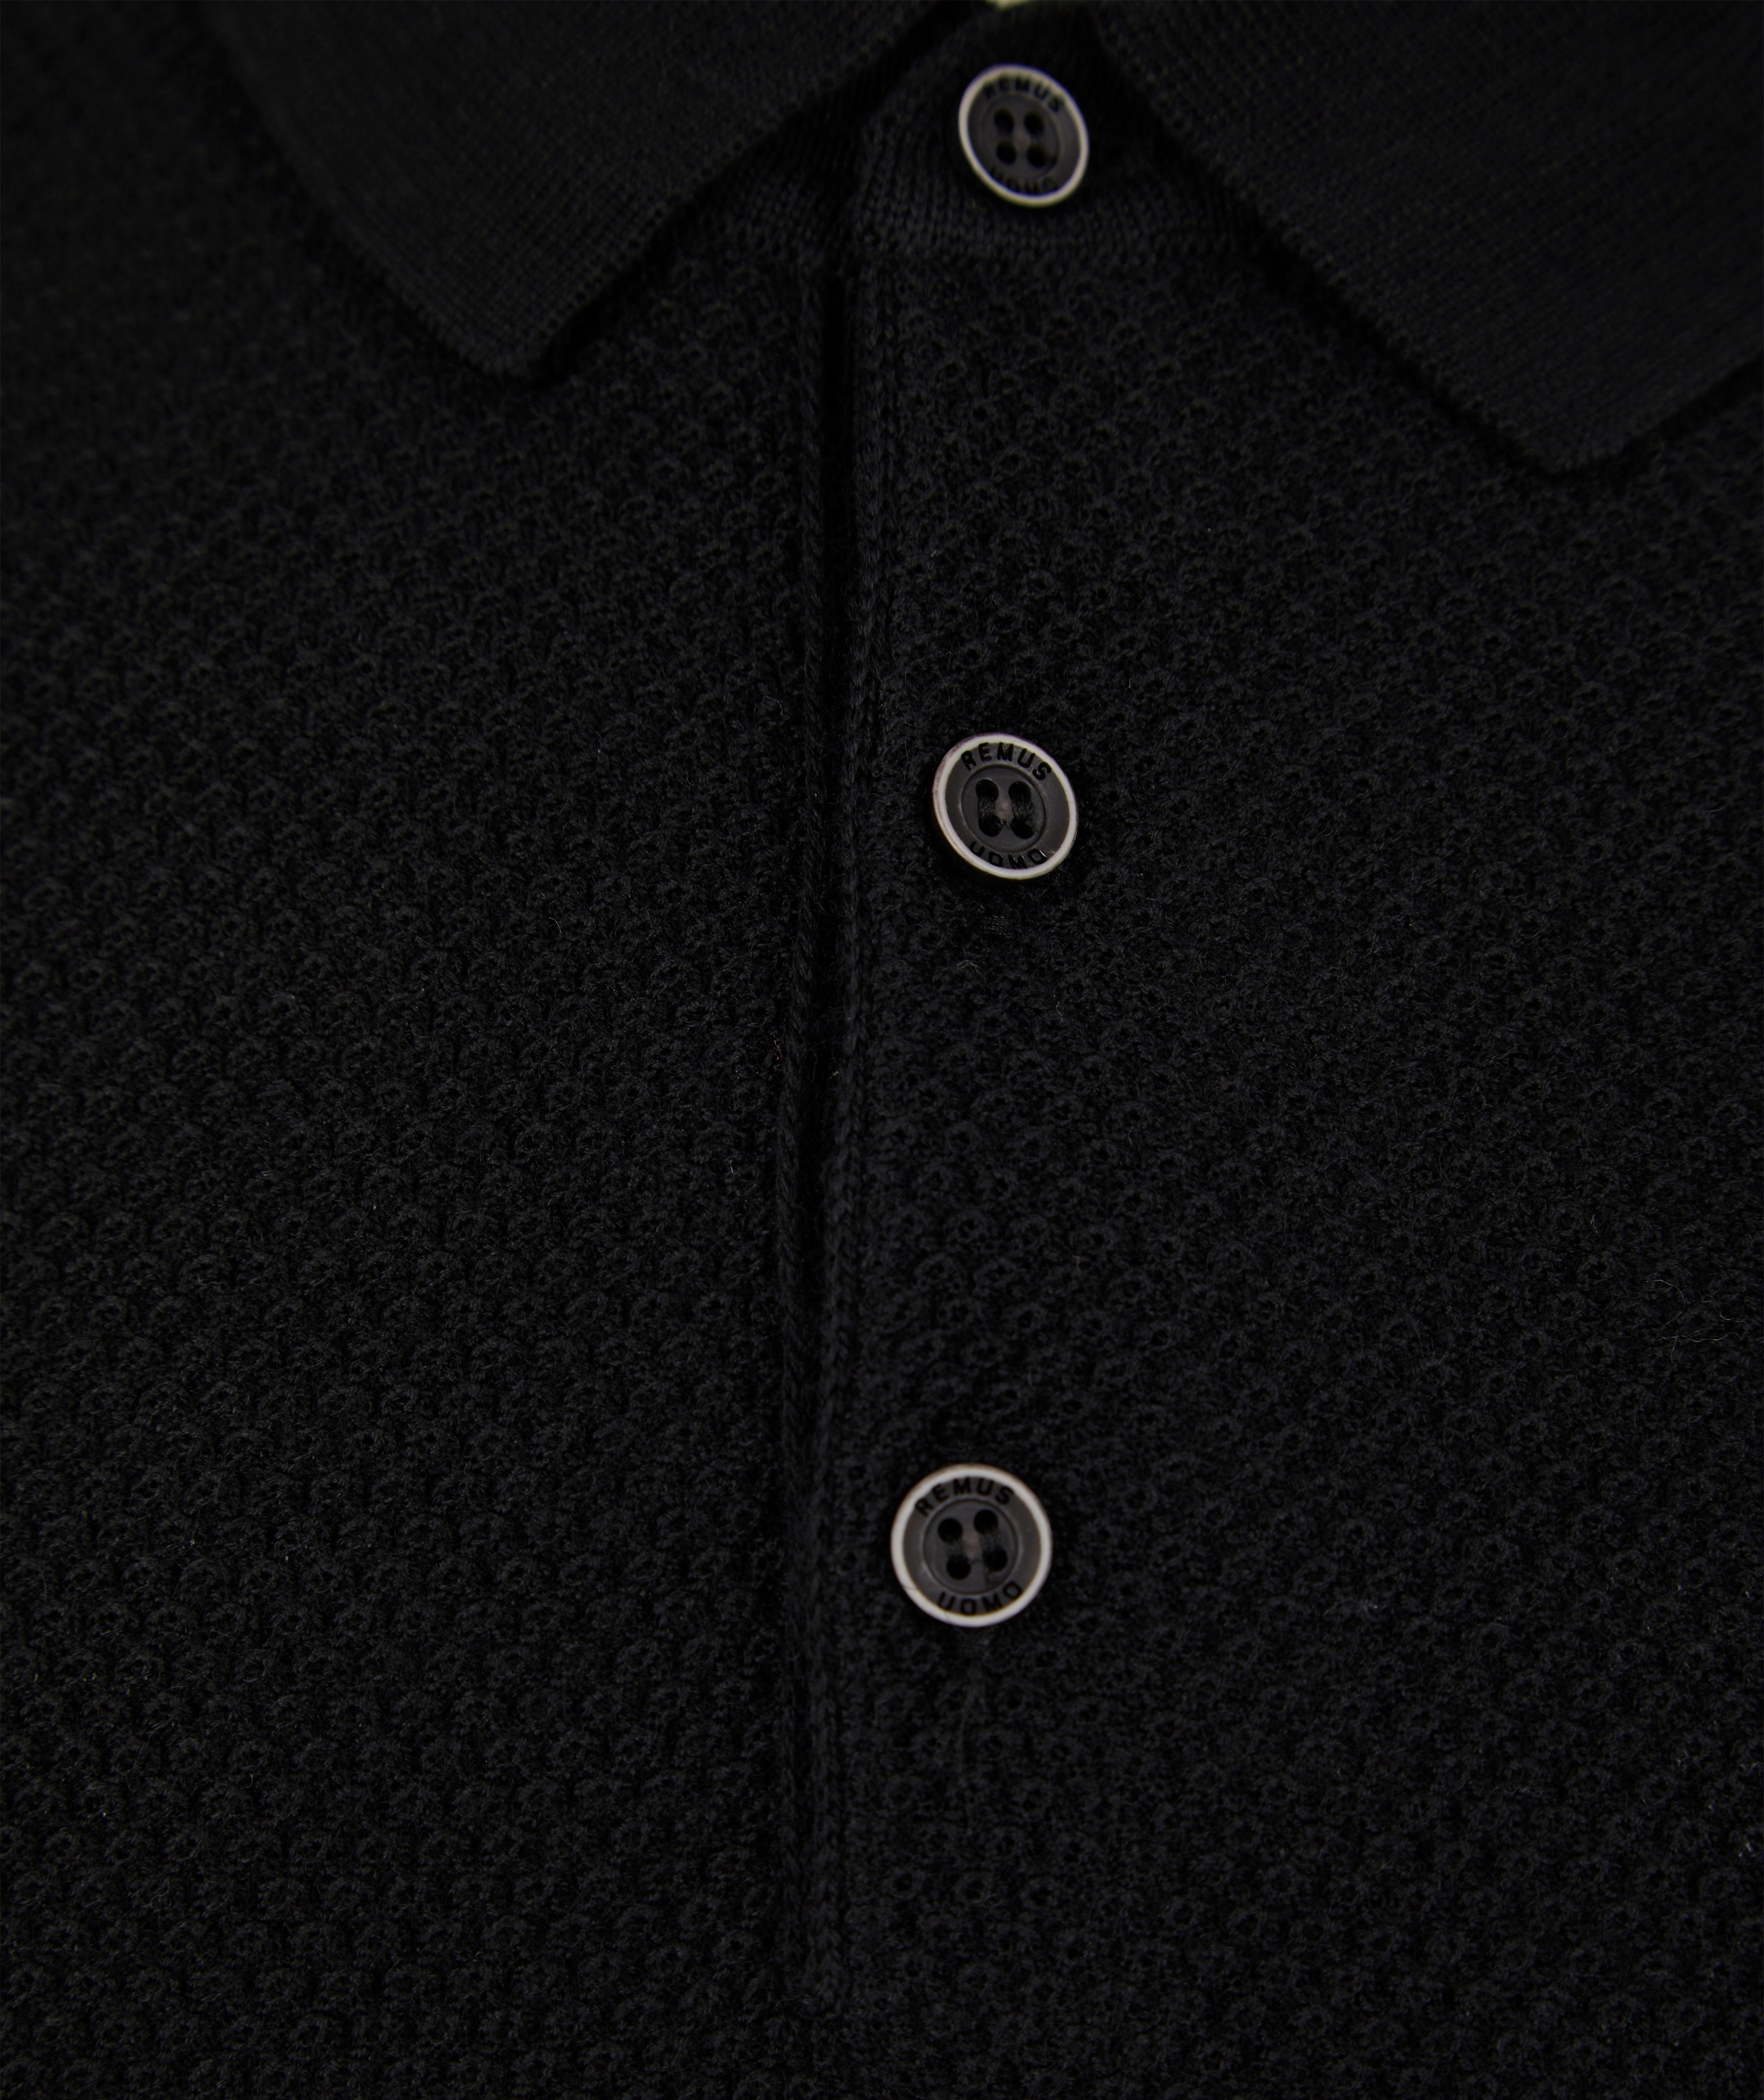 Load image into Gallery viewer, Remus Waffle Polo Black
